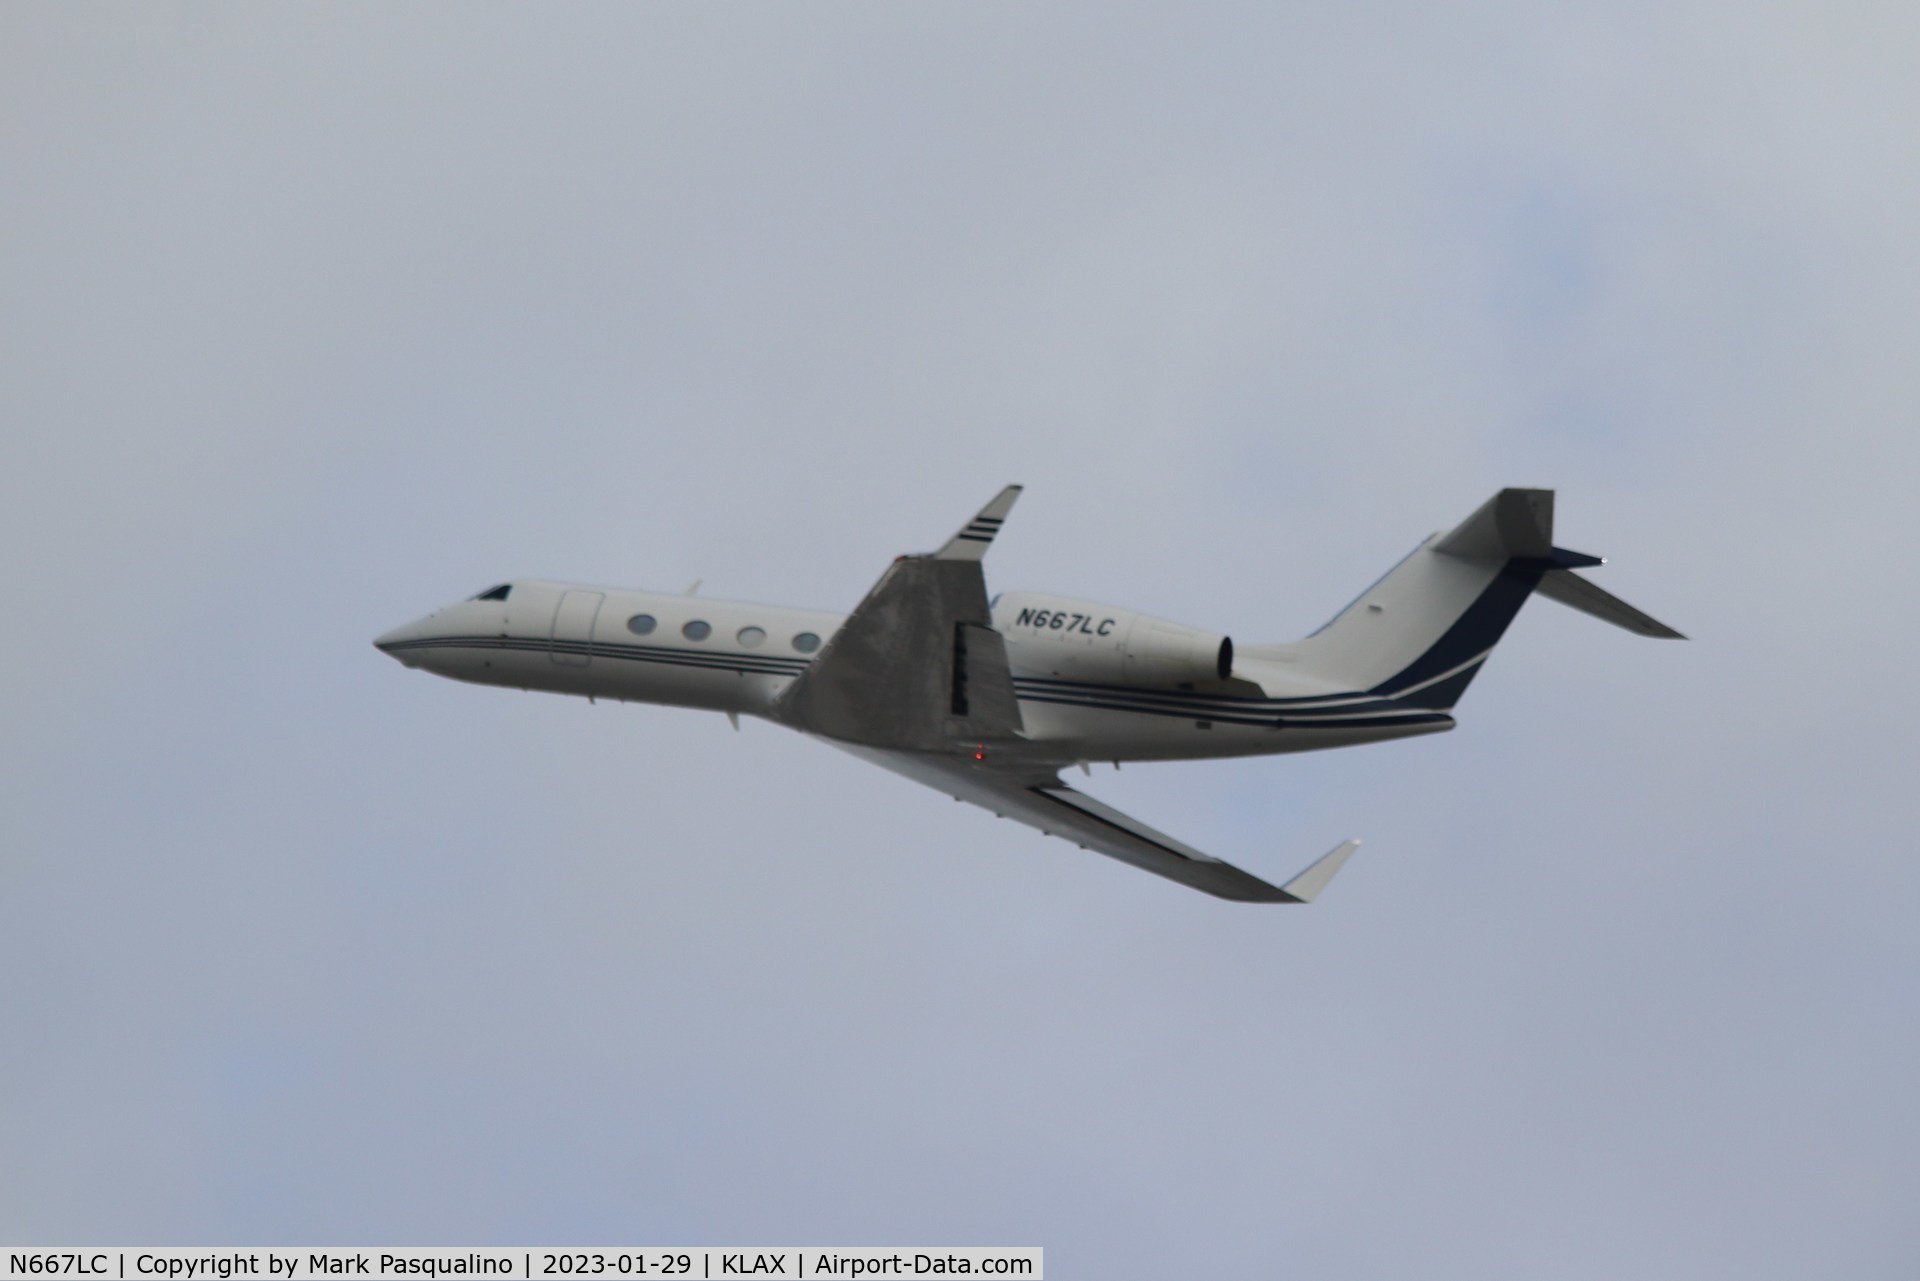 N667LC, 2007 Bombardier Challenger 604 (CL-600-2B16) C/N 5740, Challenger 604